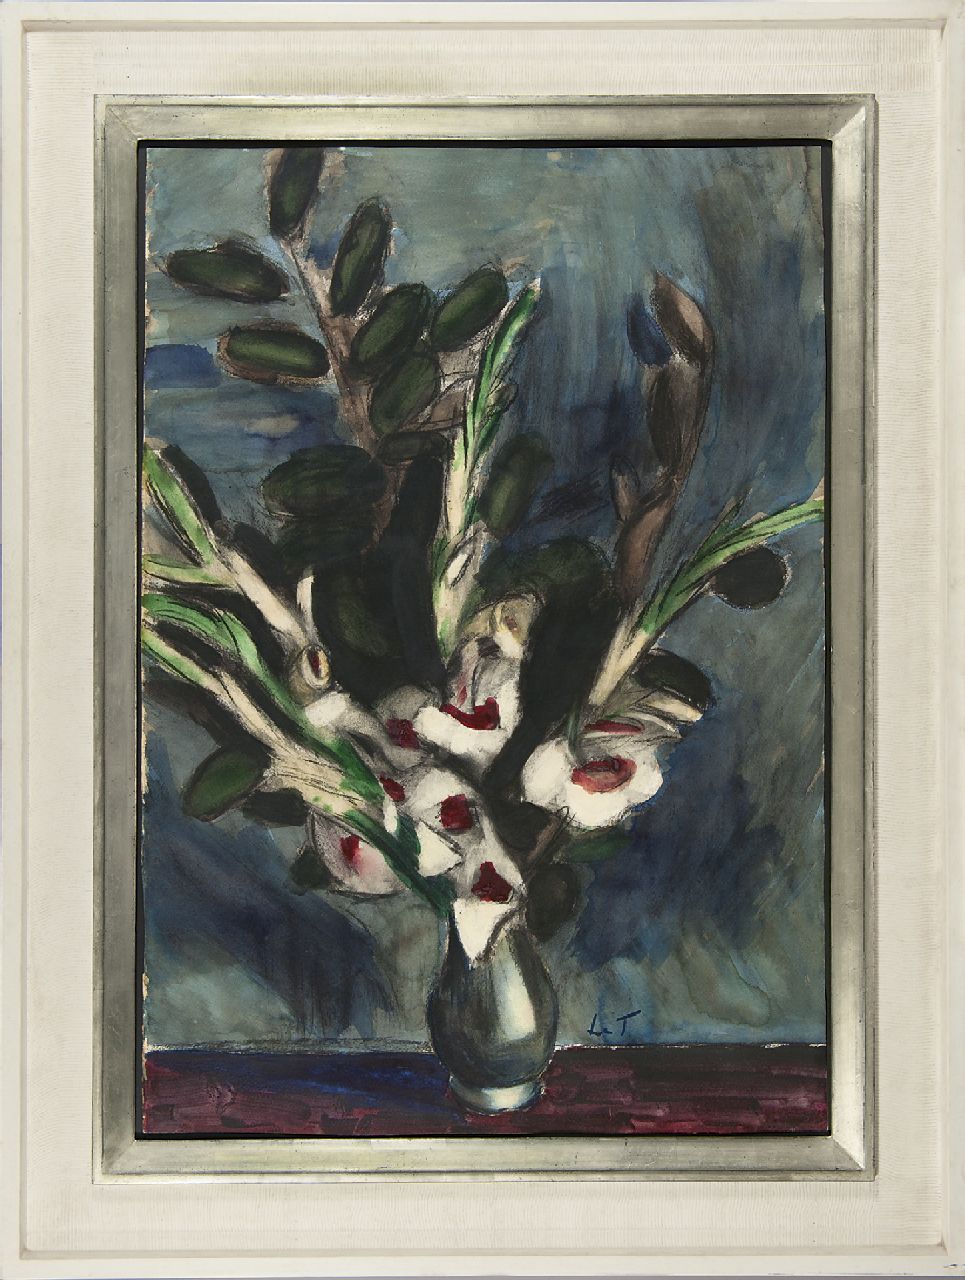 Fauconnier H.V.G. Le | 'Henri' Victor Gabriel Le Fauconnier | Watercolours and drawings offered for sale | Sword lilies, black chalk and watercolour on paper 99.1 x 68.4 cm, signed l.r. with initials